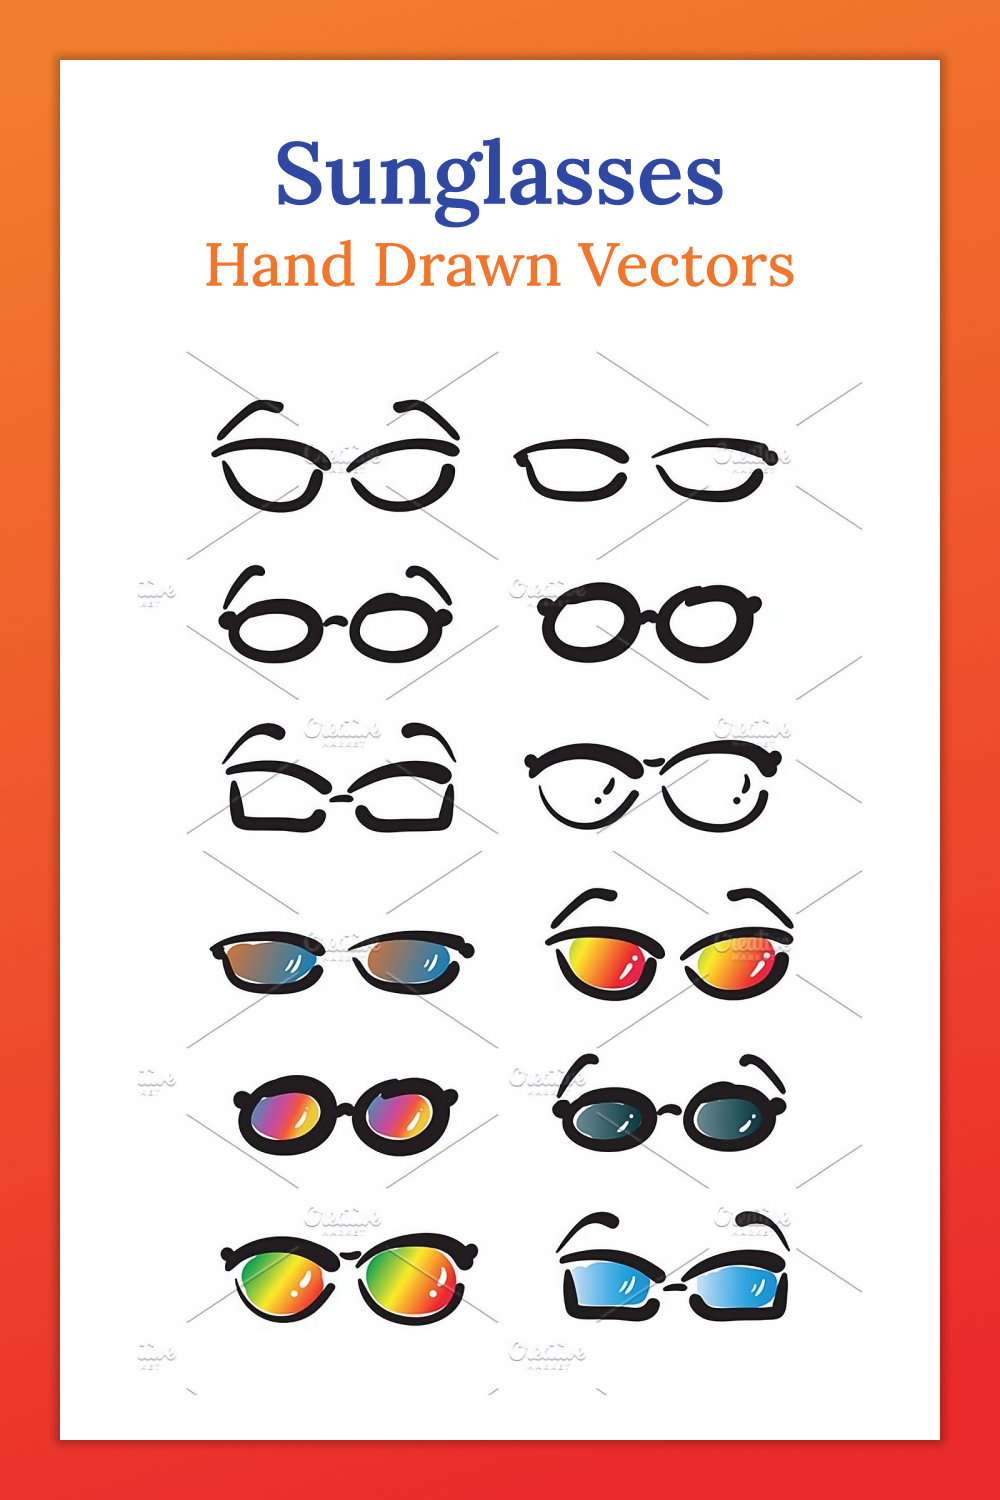 Hand Drawn Sunglasses And Glasses Pinterest Cover.